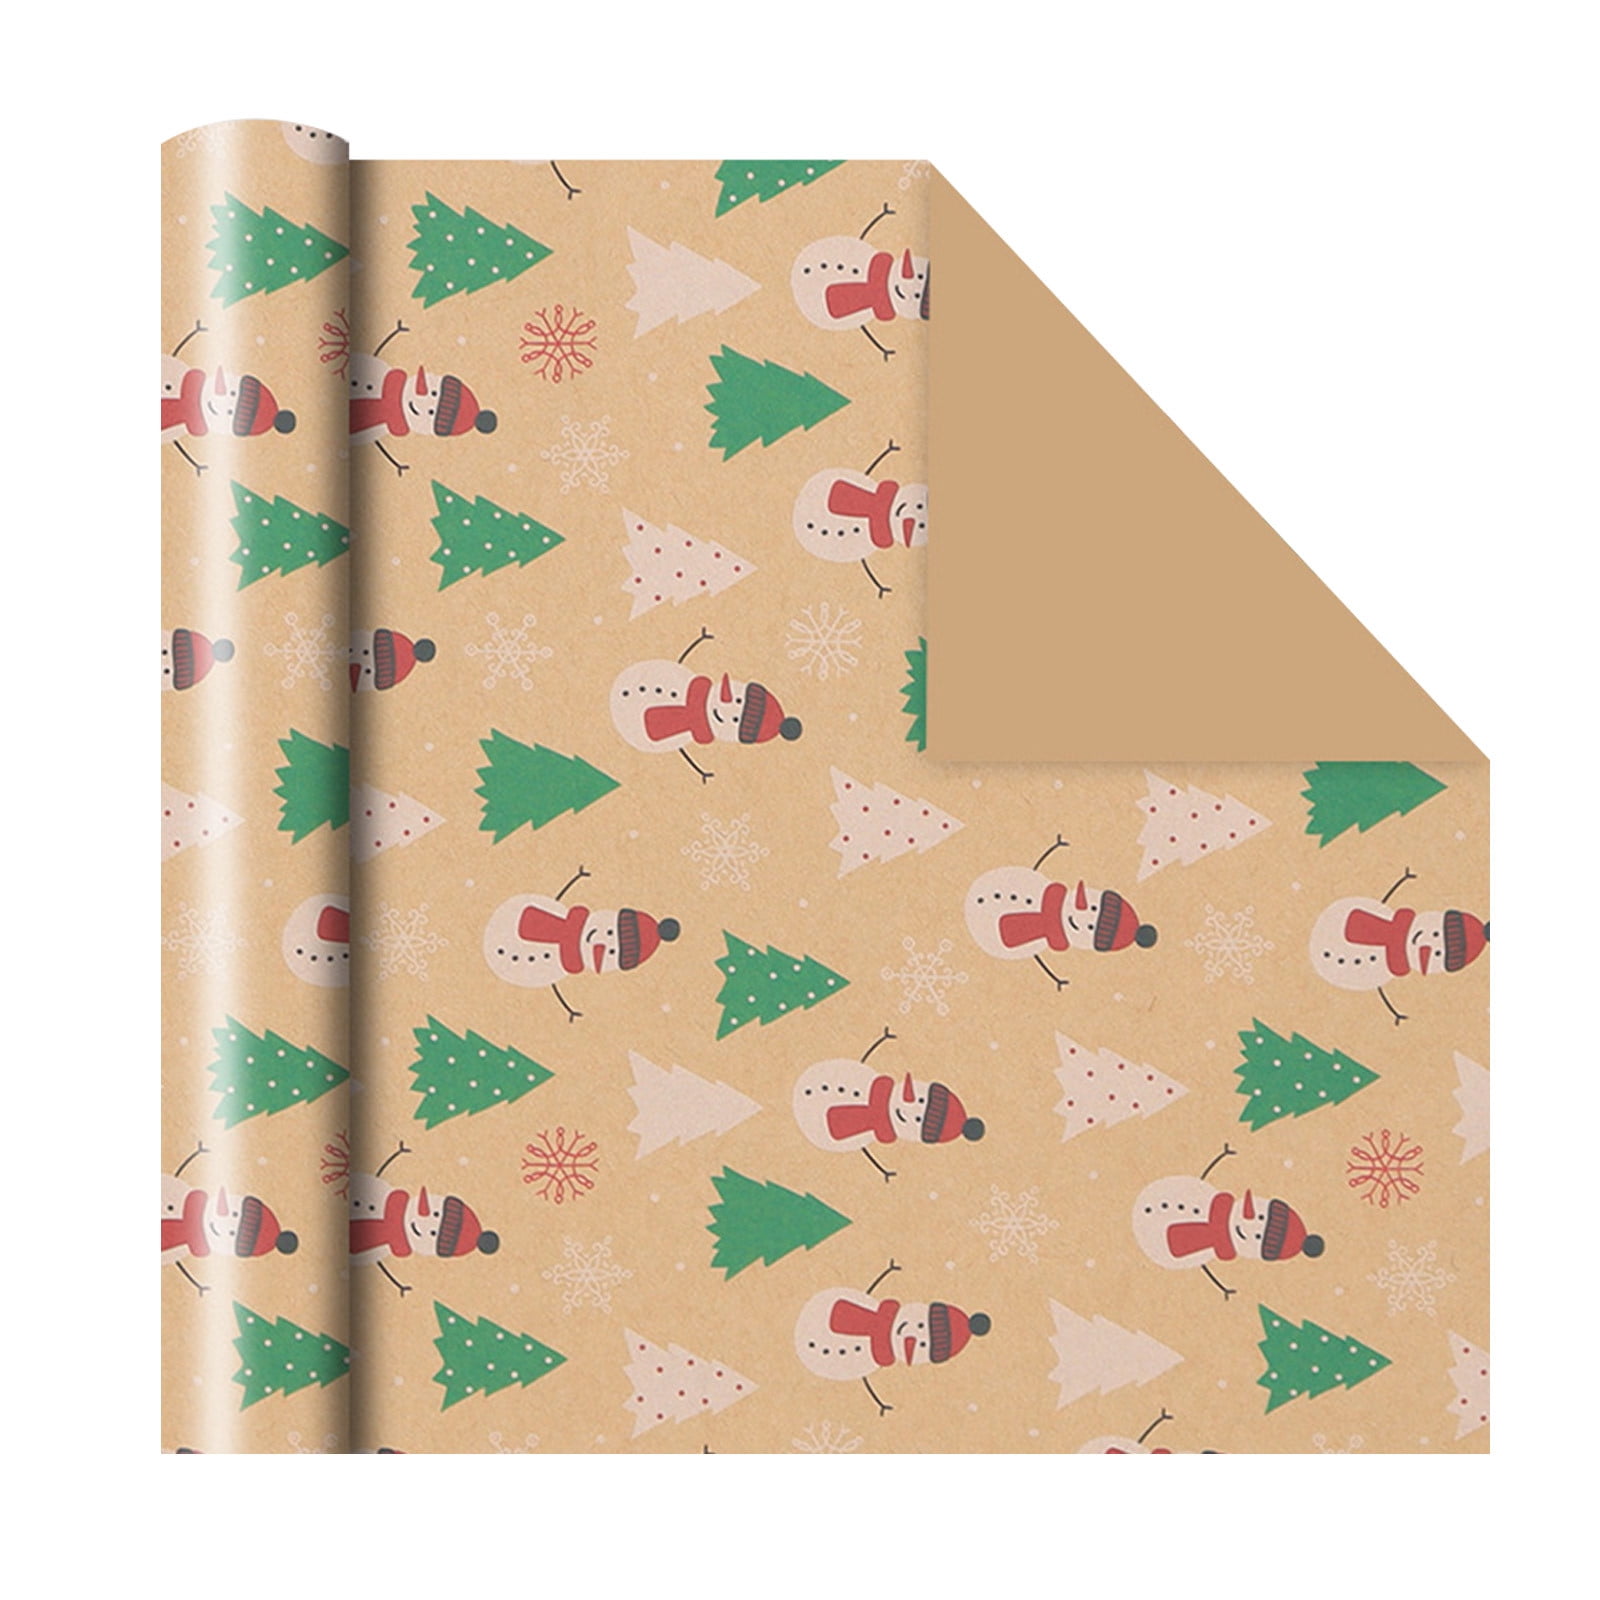 LSLJS Christmas Wrapping Paper Clearance, Christmas Gift Wrapping Paper,  Kraft Paper 20x 30 Folded Xmas Wrapping Paper Rolls for Gift Wrapping,  Book Cover 